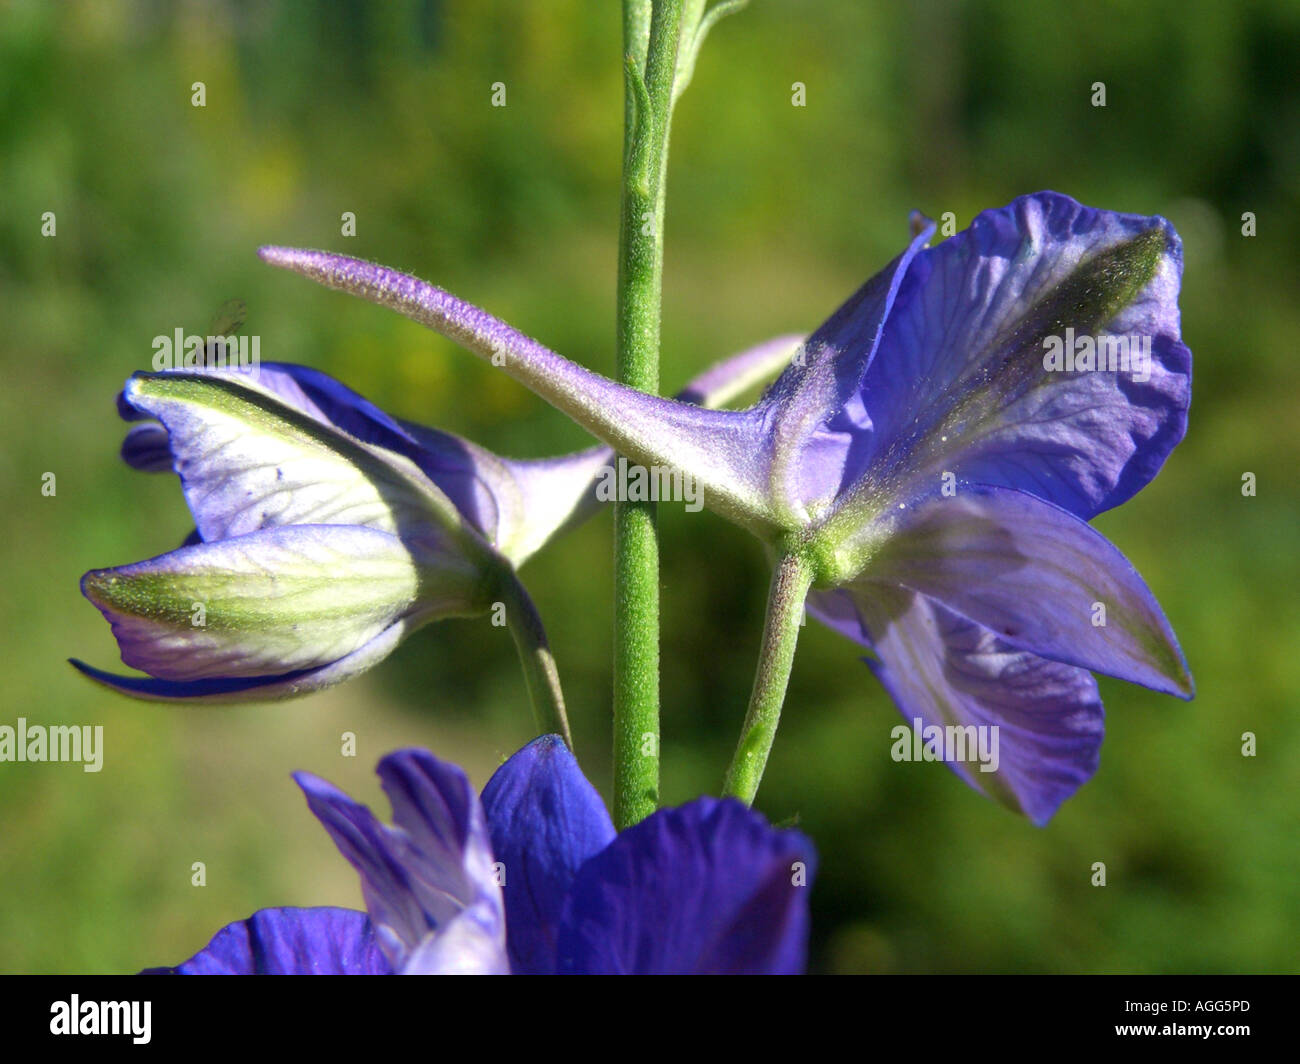 doubtful knight's-spur, Larkspur, Annual Delphinium (Consolida ajacis), flowers with spur Stock Photo